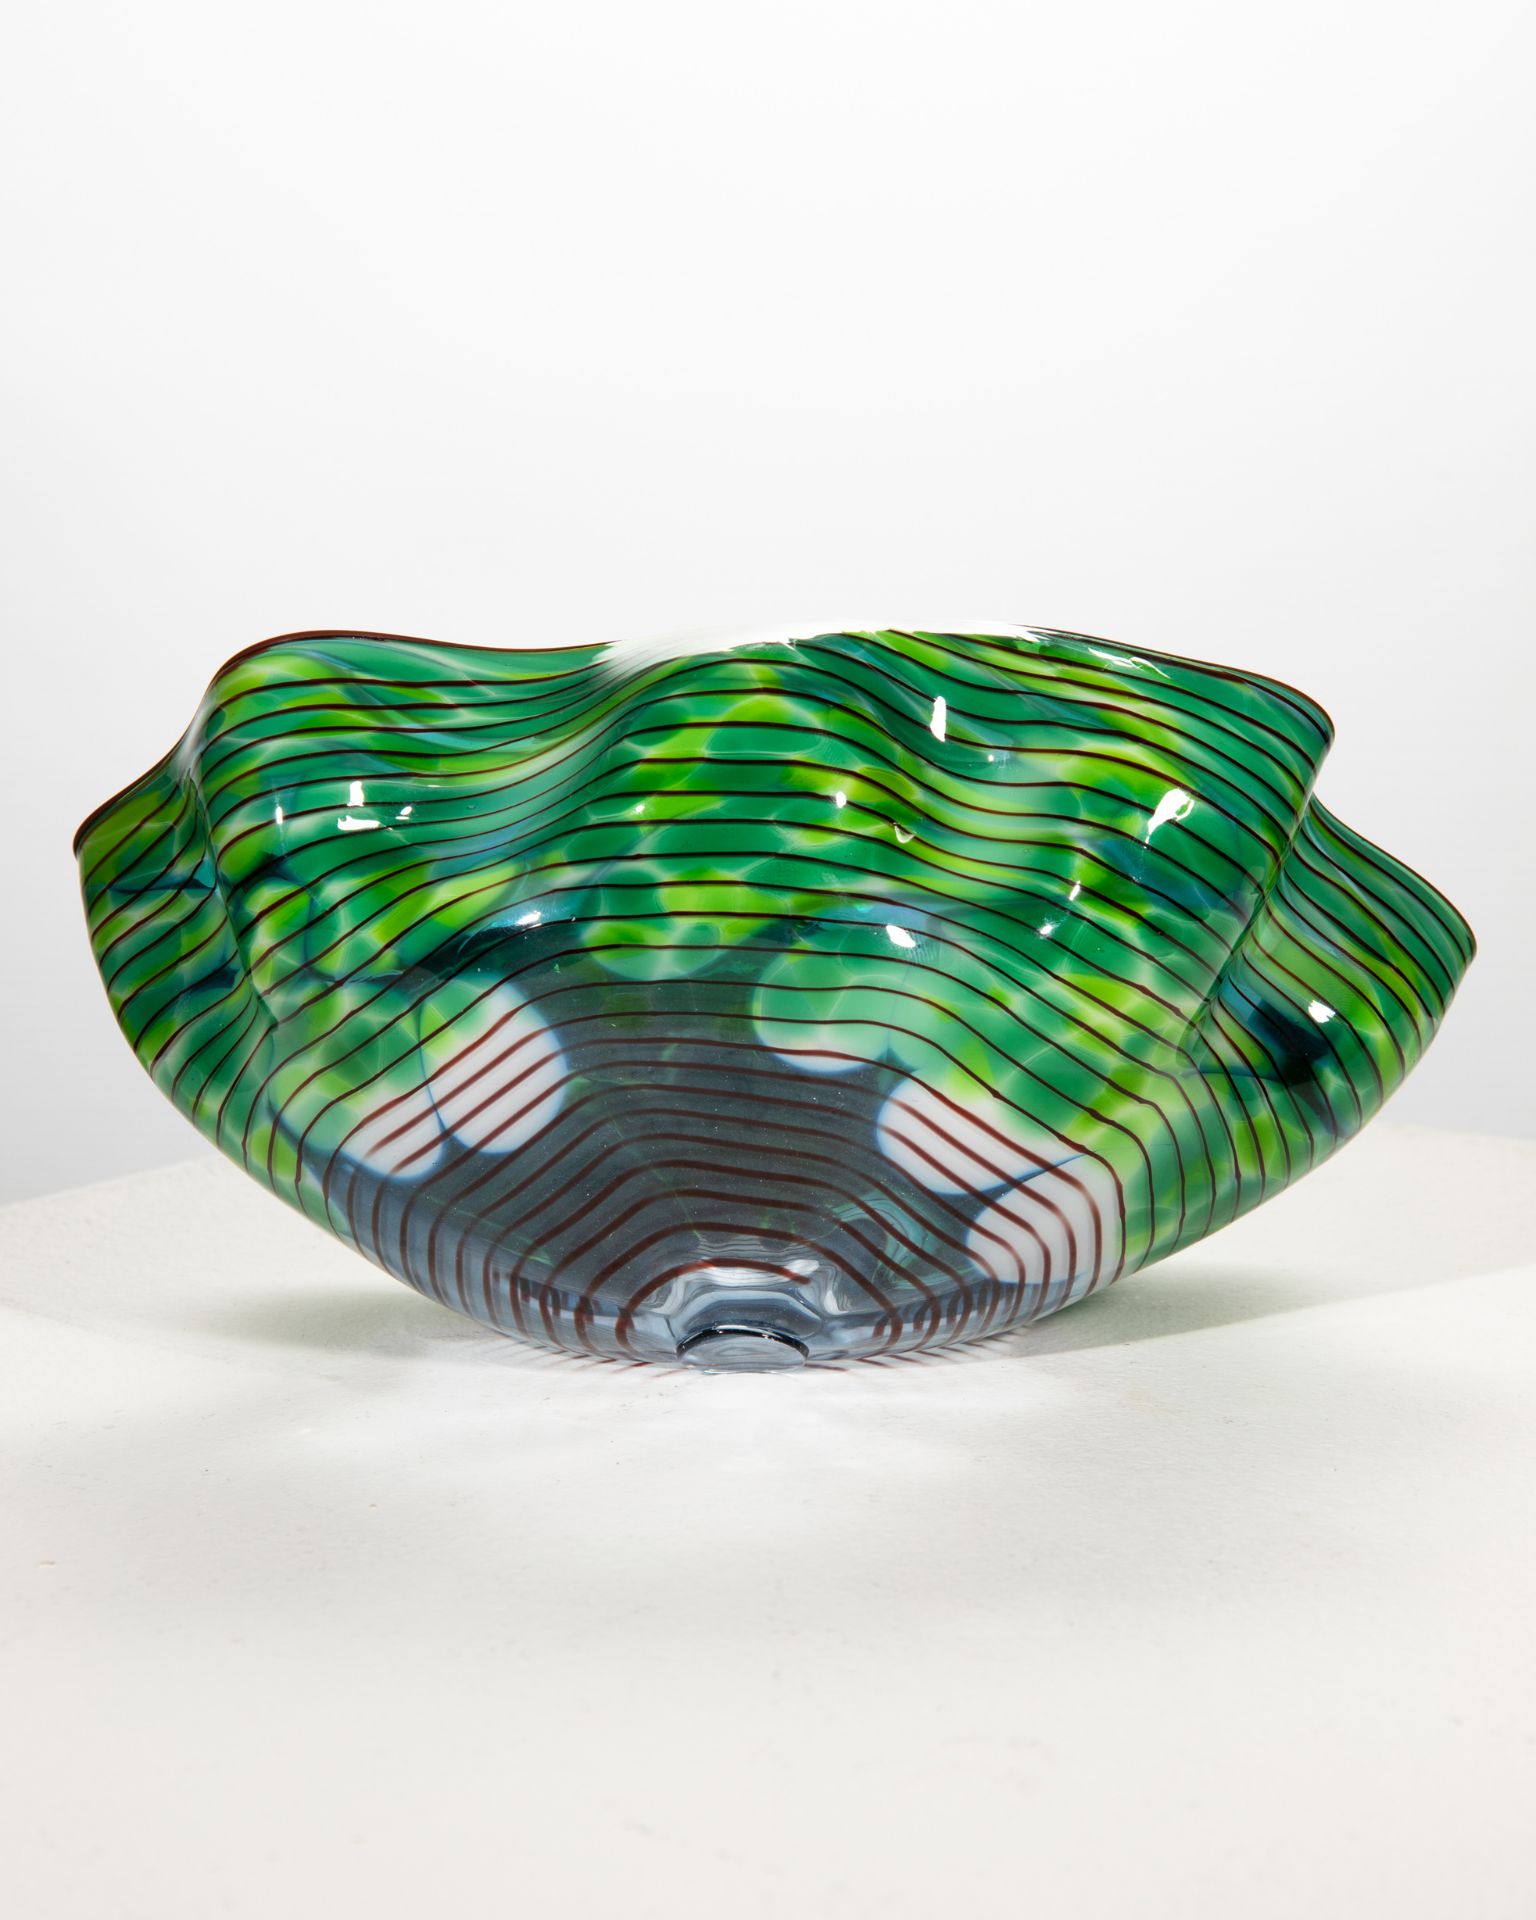 Dale Chihuly, 3 seaforms piece sculptural glasforms - Image 15 of 17